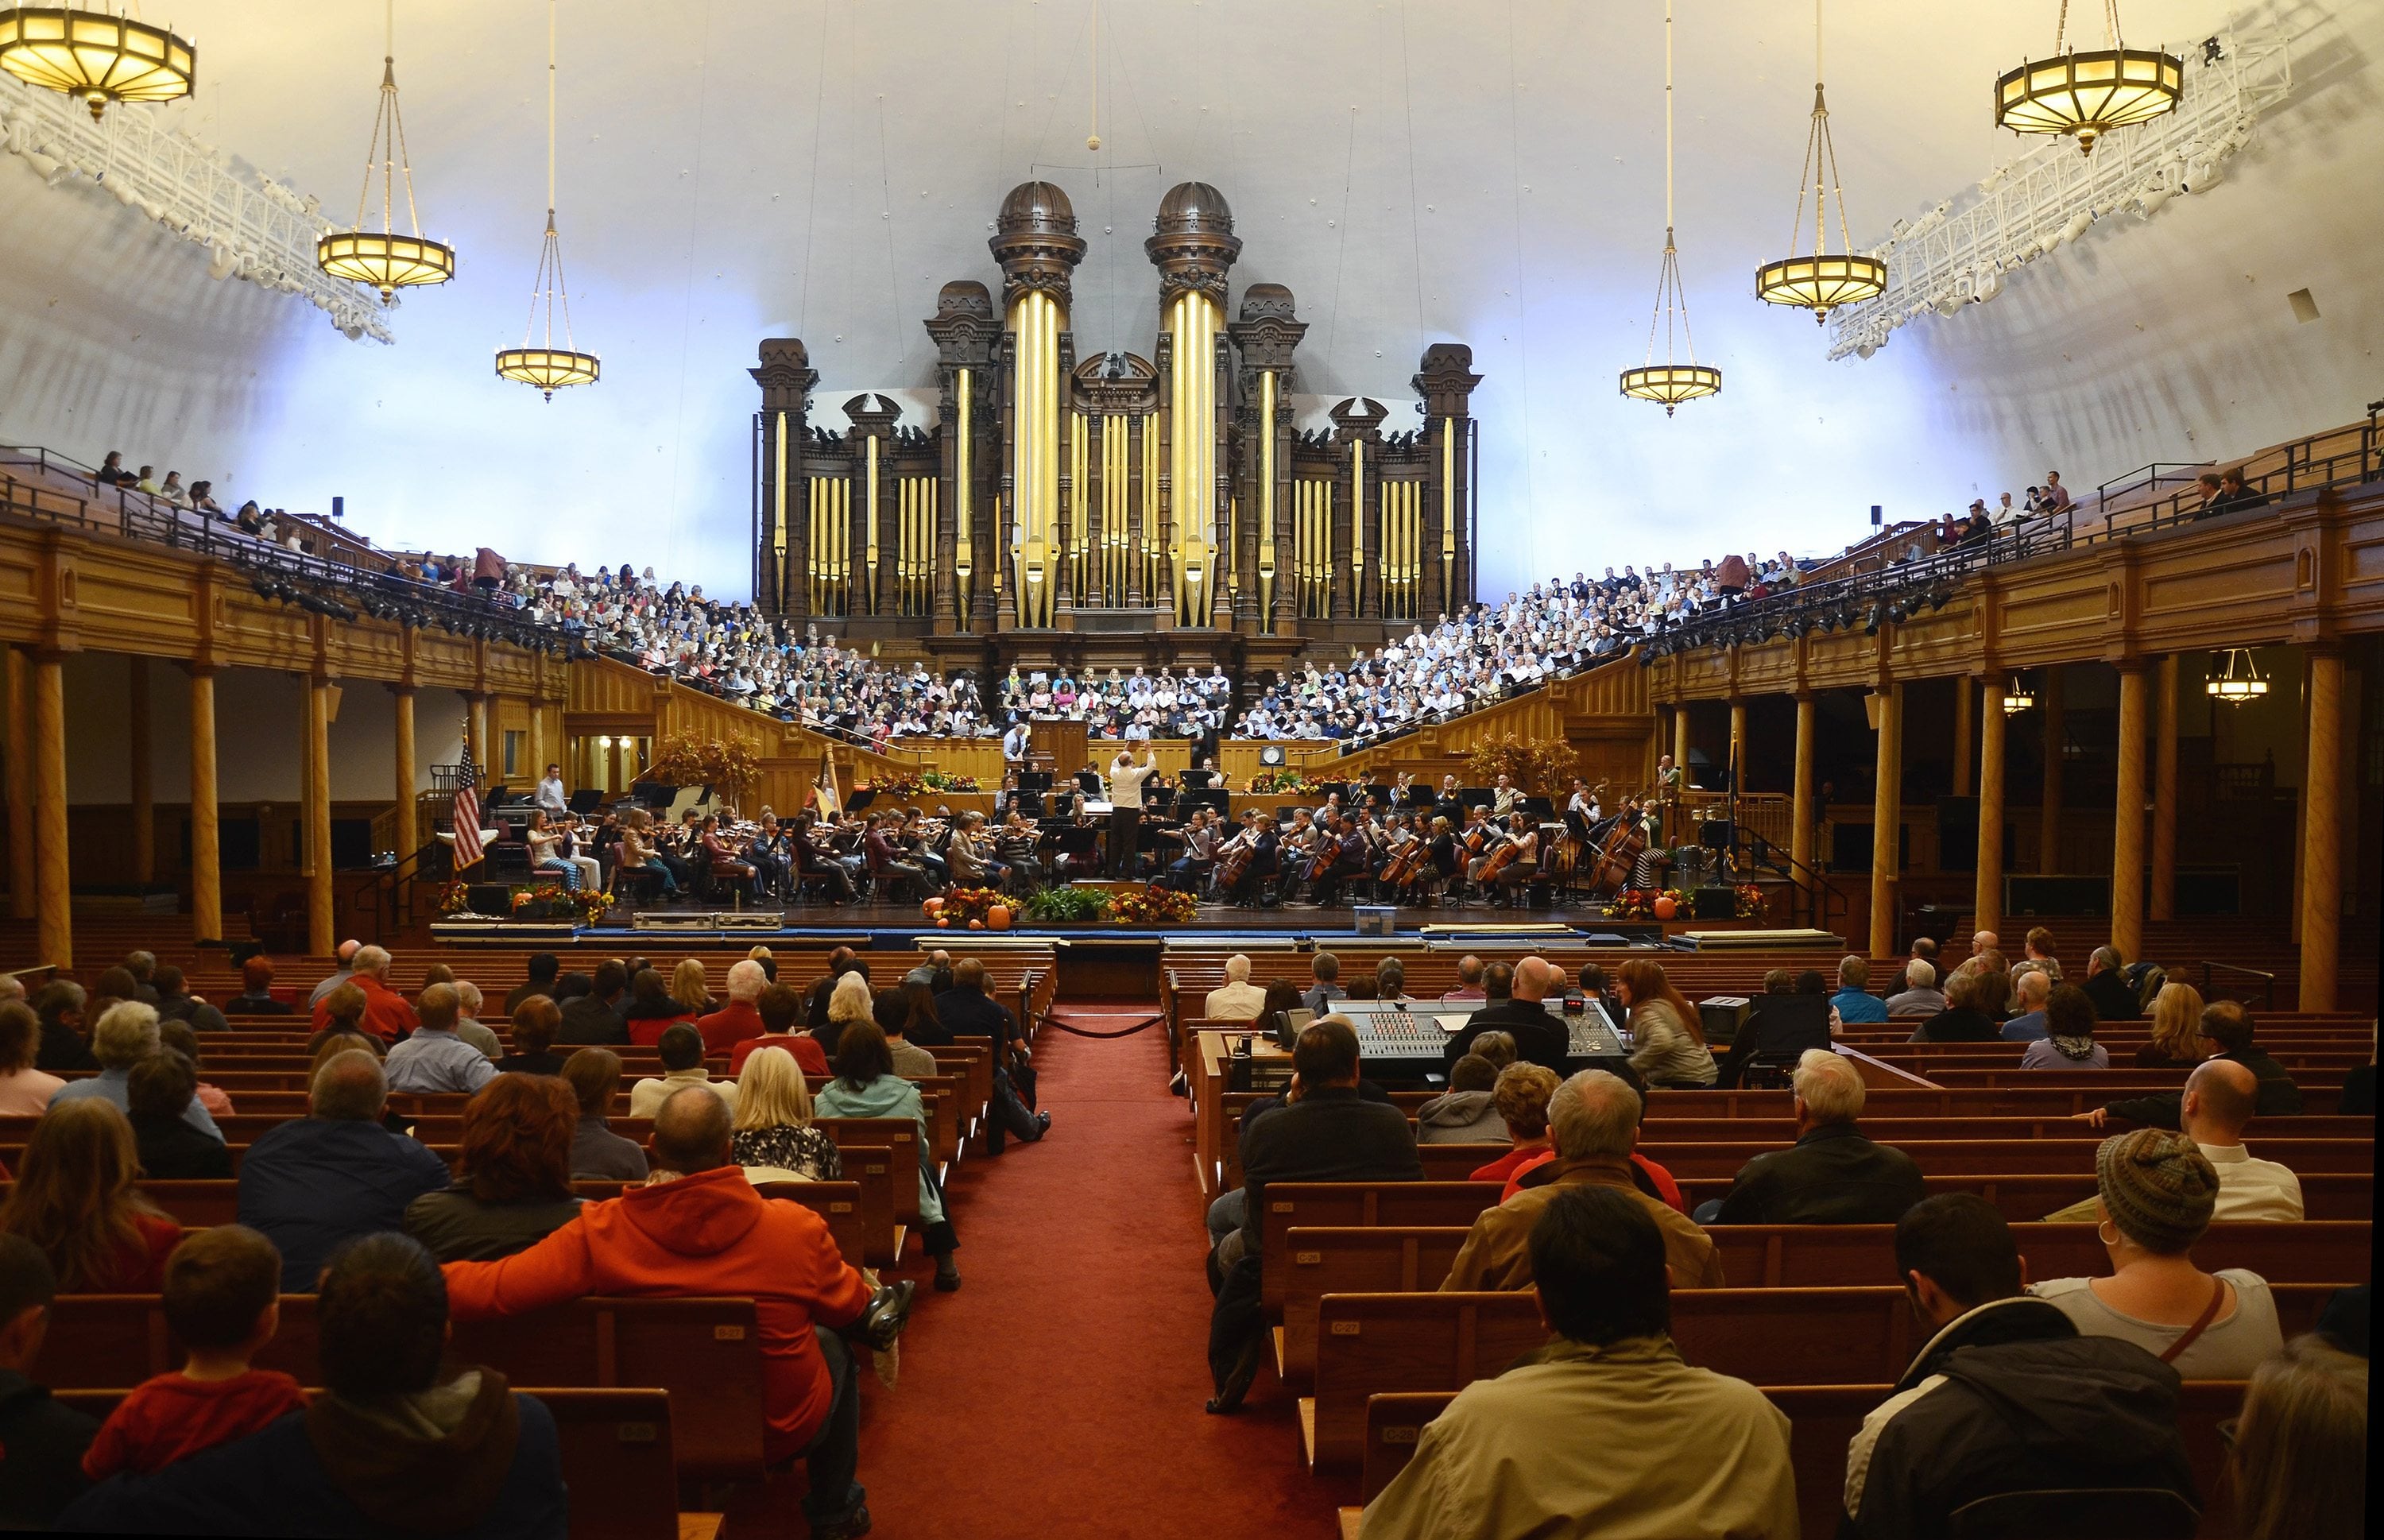 The Mormon Tabernacle Choir rehearses at the Mormon Tabernacle in Temple Square, Salt Lake City. On most Thursday nights, the rehearsals are open to the public.